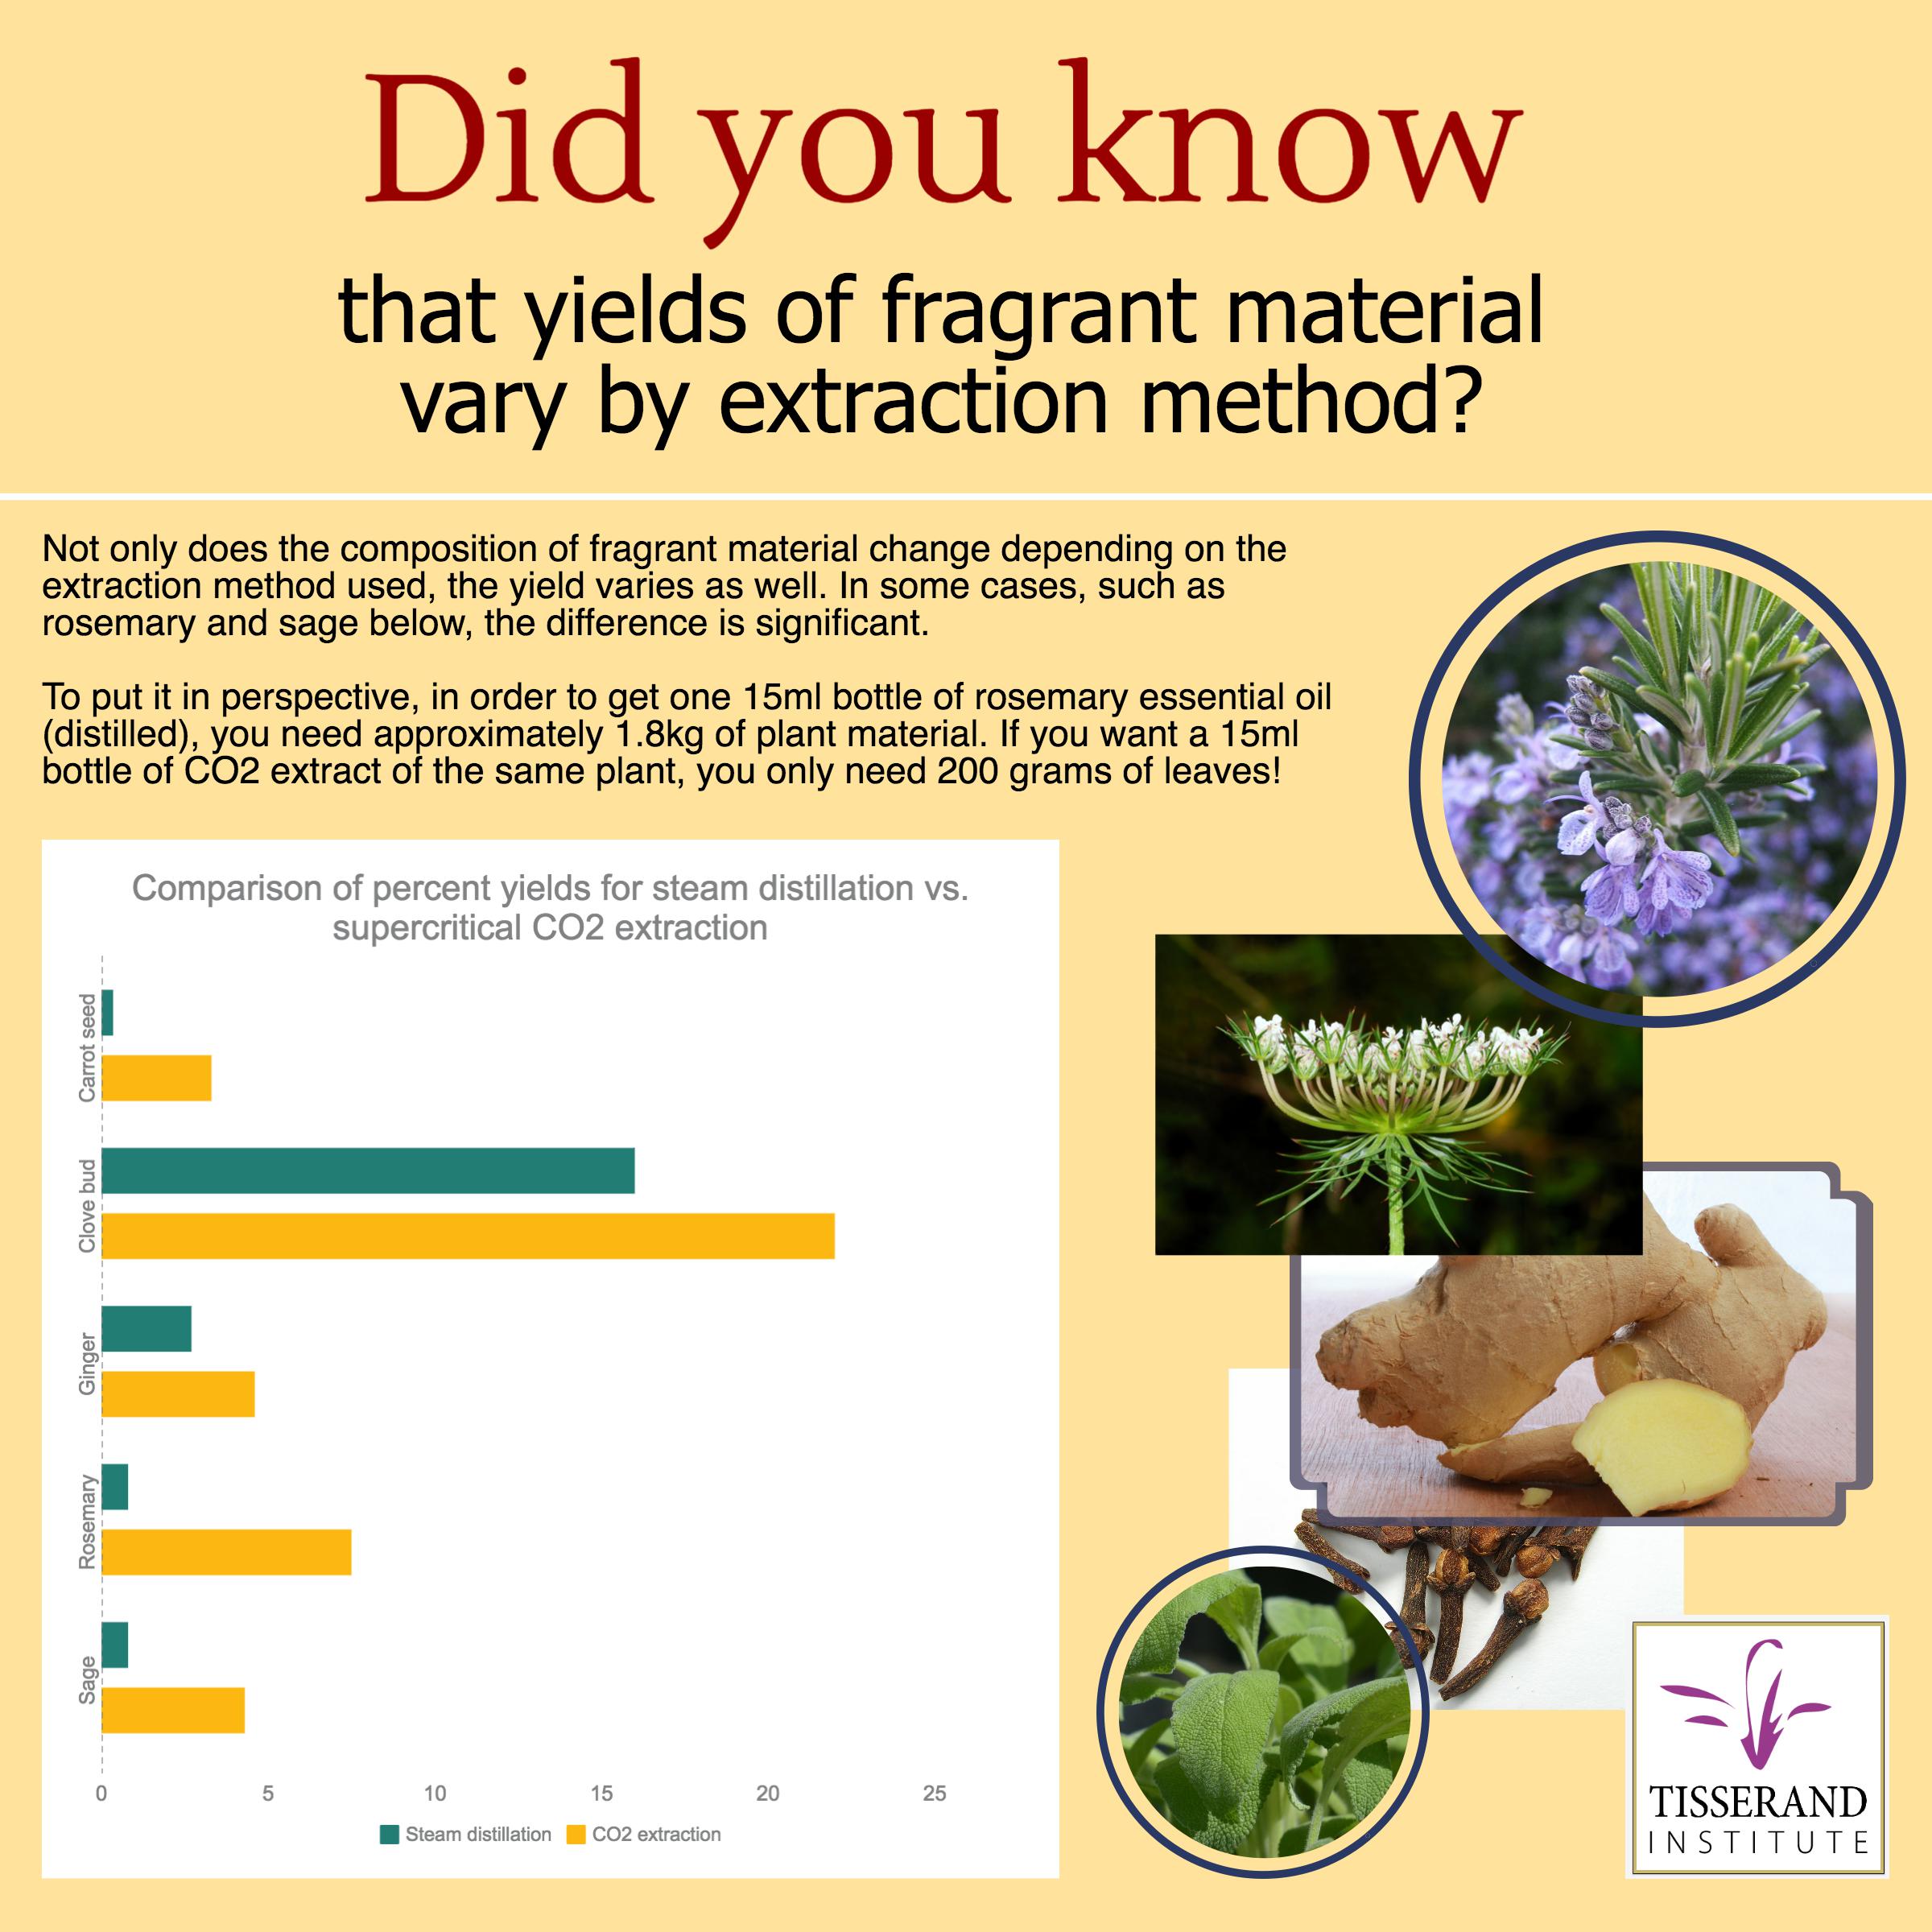 Extraction | Did you know that fragrant material yields vary by extraction method?